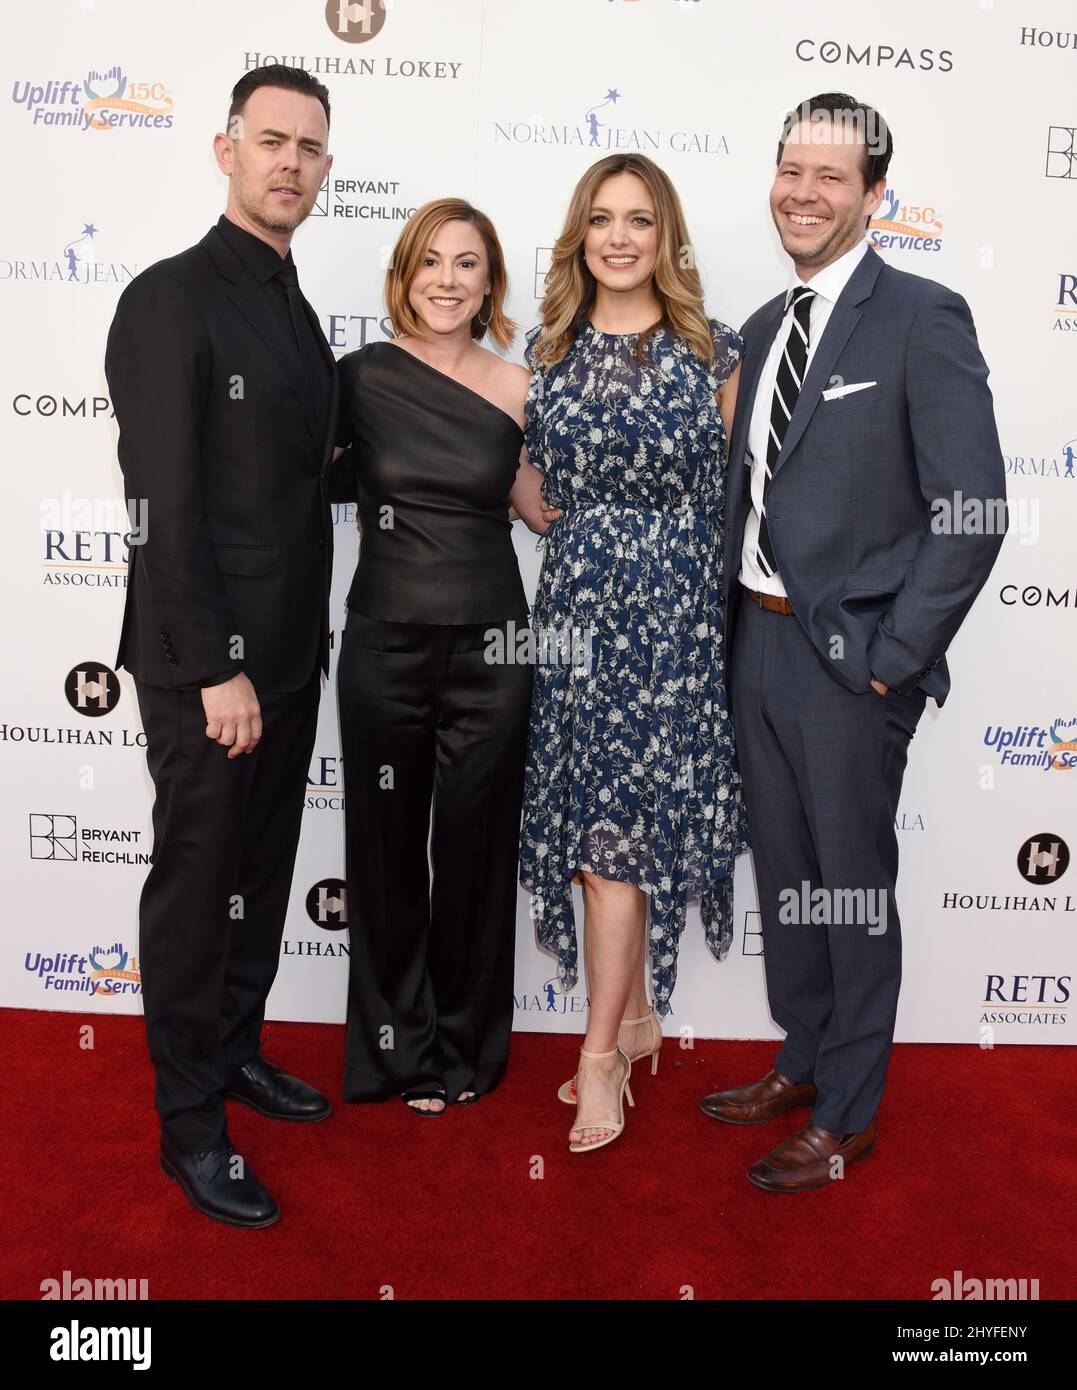 Colin Hanks, Samantha Bryant, Erica Hanson and Ike Barinholtz at the Uplift Family Services at Hollygrove's '7th Annual Norma Jean Gala' held at the Hollygrove Campus on May 19, 2018 in Hollywood, Ca. Stock Photo